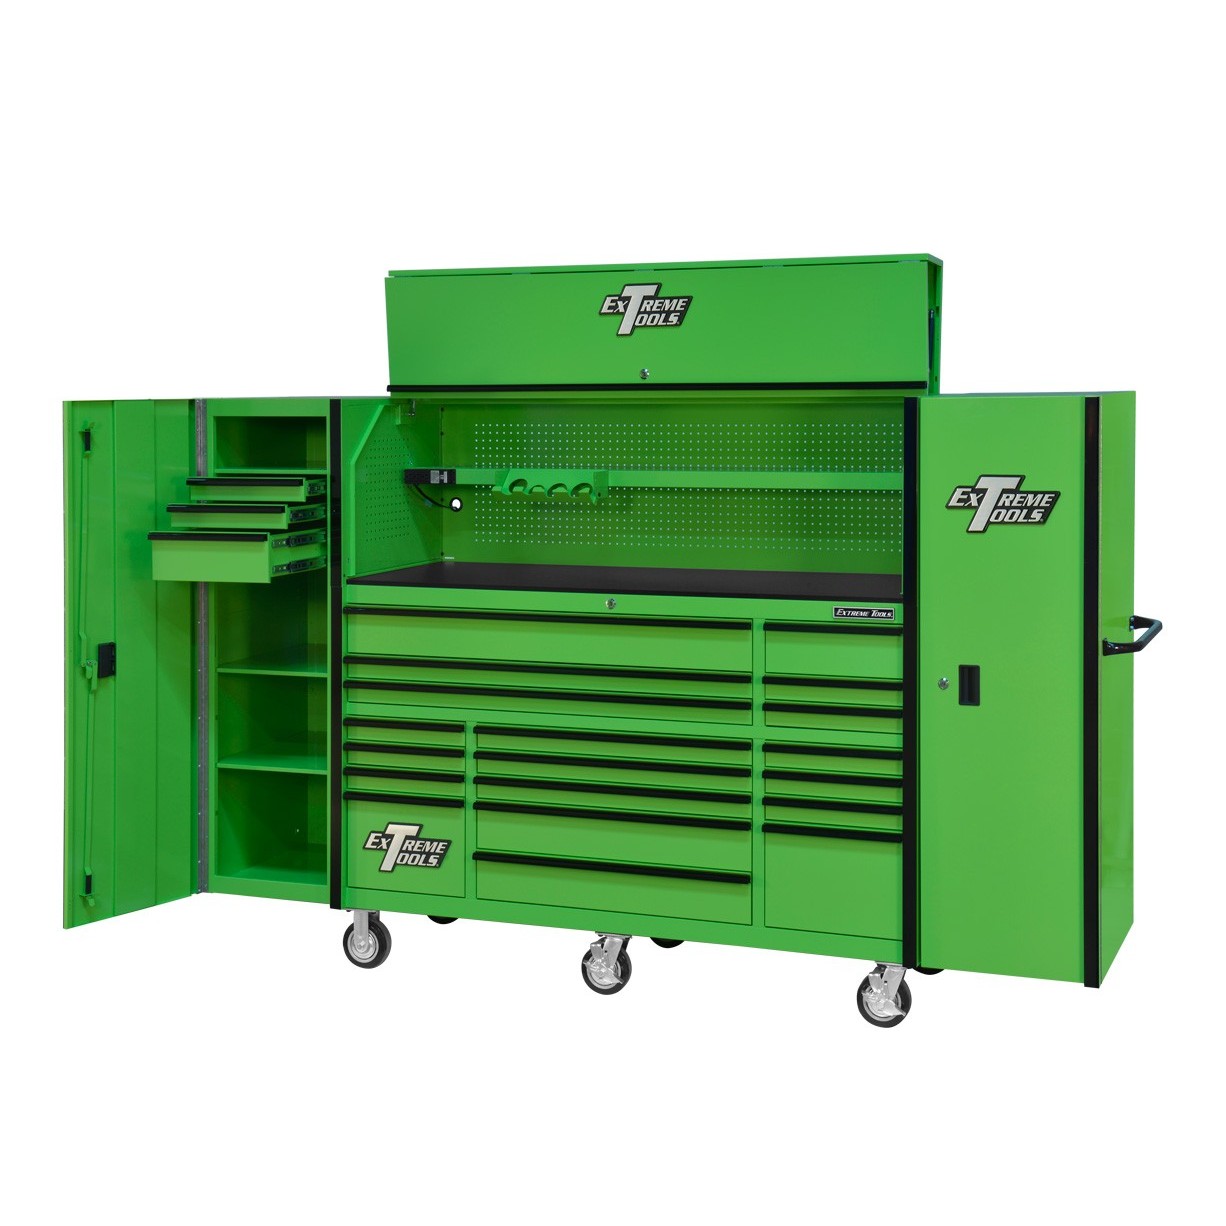 MAXIM 72” Green Toolbox Top Chest & Roll Cabinet Combo with 28